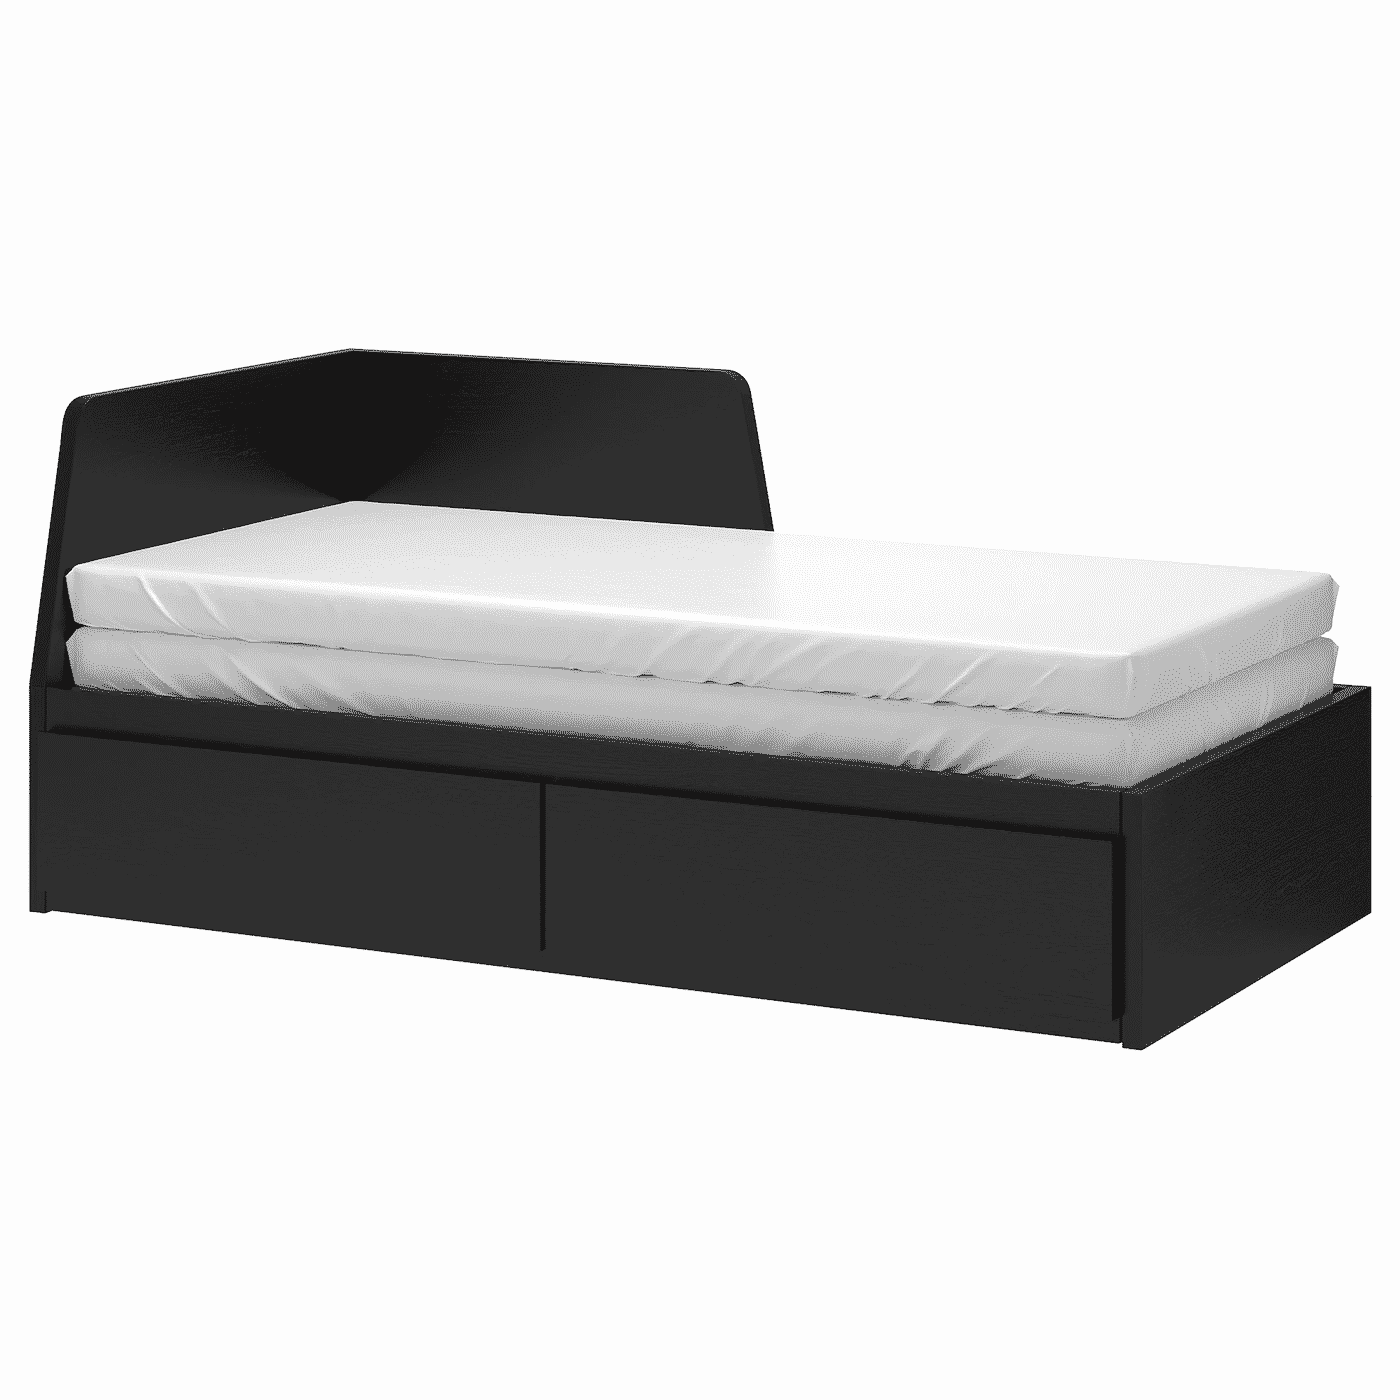 Best Ikea Twin Bed With Storage Review, Ikea Twin Bed Set